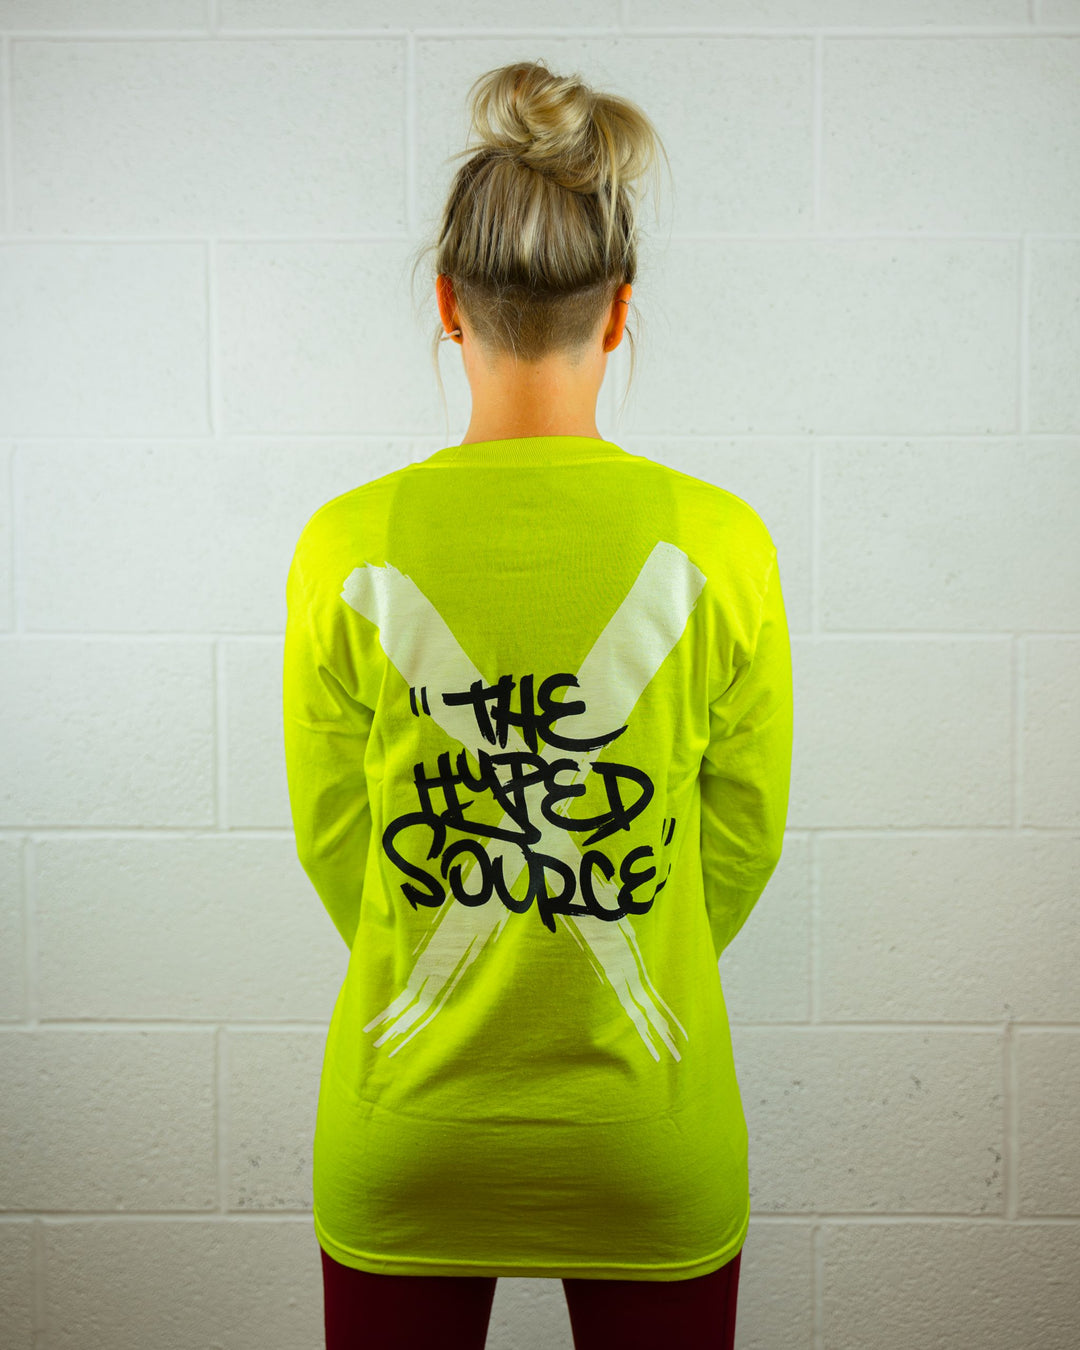 THE HYPED SOURCE CROSSED LONG SLEEVE (YELLOW)